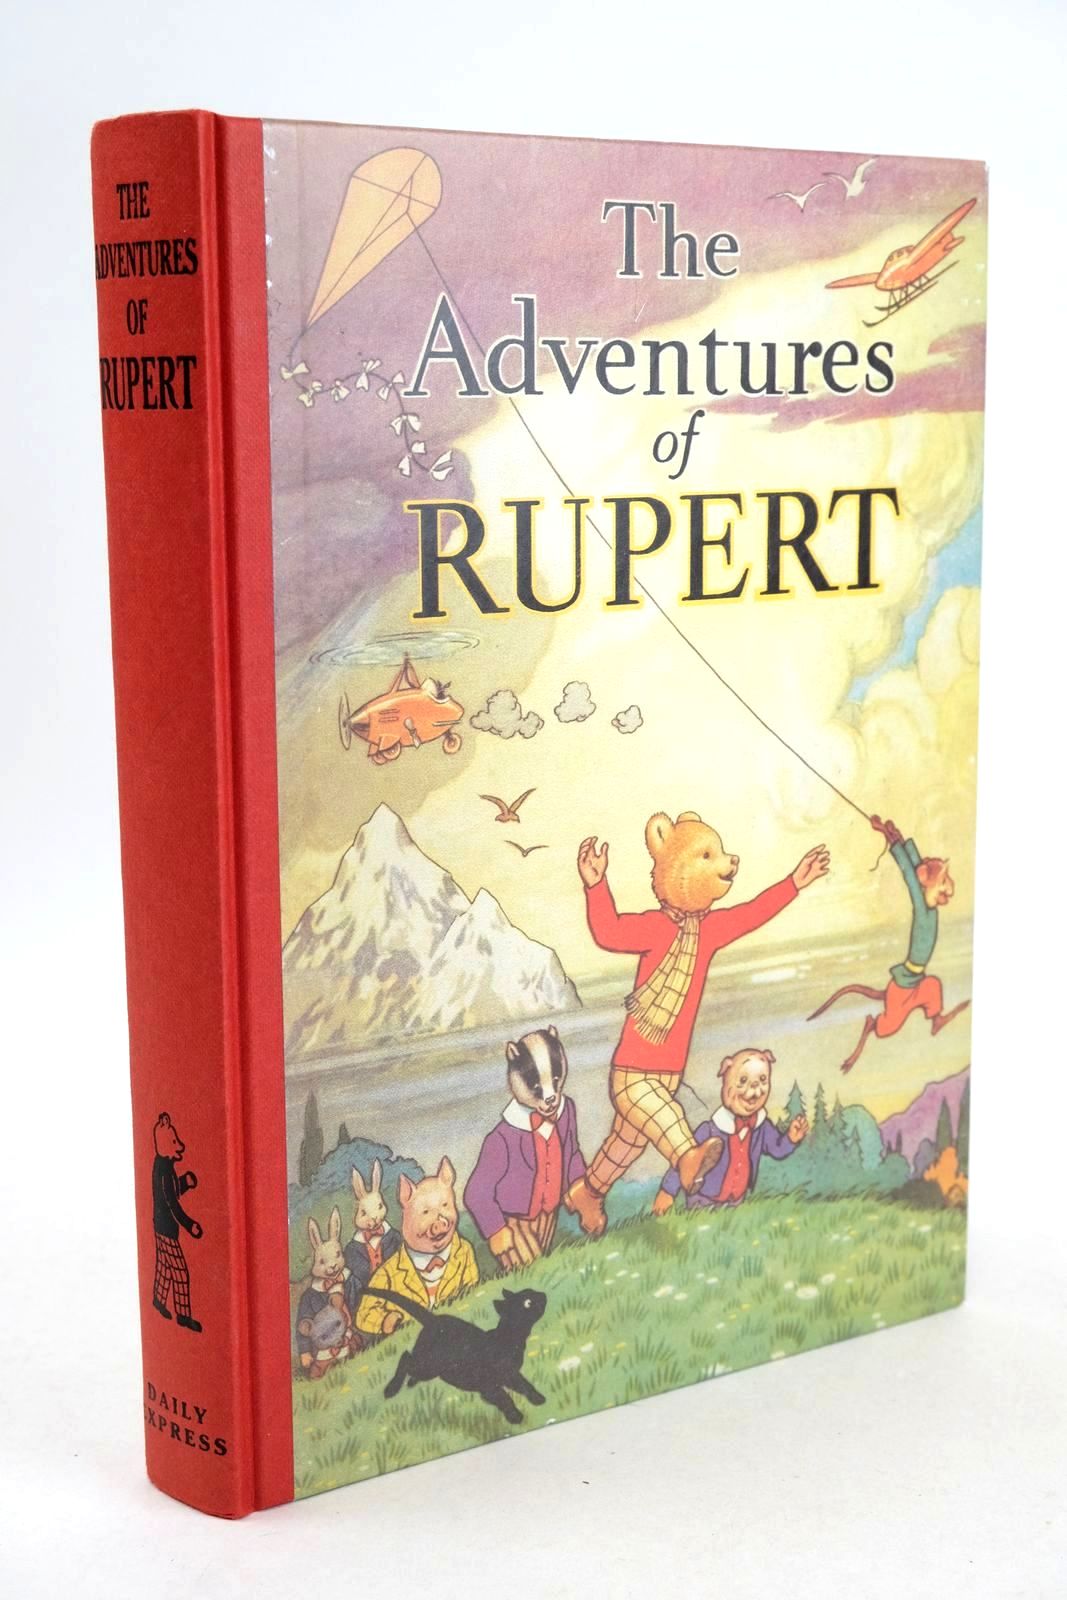 Photo of RUPERT ANNUAL 1939 (FACSIMILE) - THE ADVENTURES OF RUPERT written by Bestall, Alfred illustrated by Bestall, Alfred published by Daily Express (STOCK CODE: 1326241)  for sale by Stella & Rose's Books